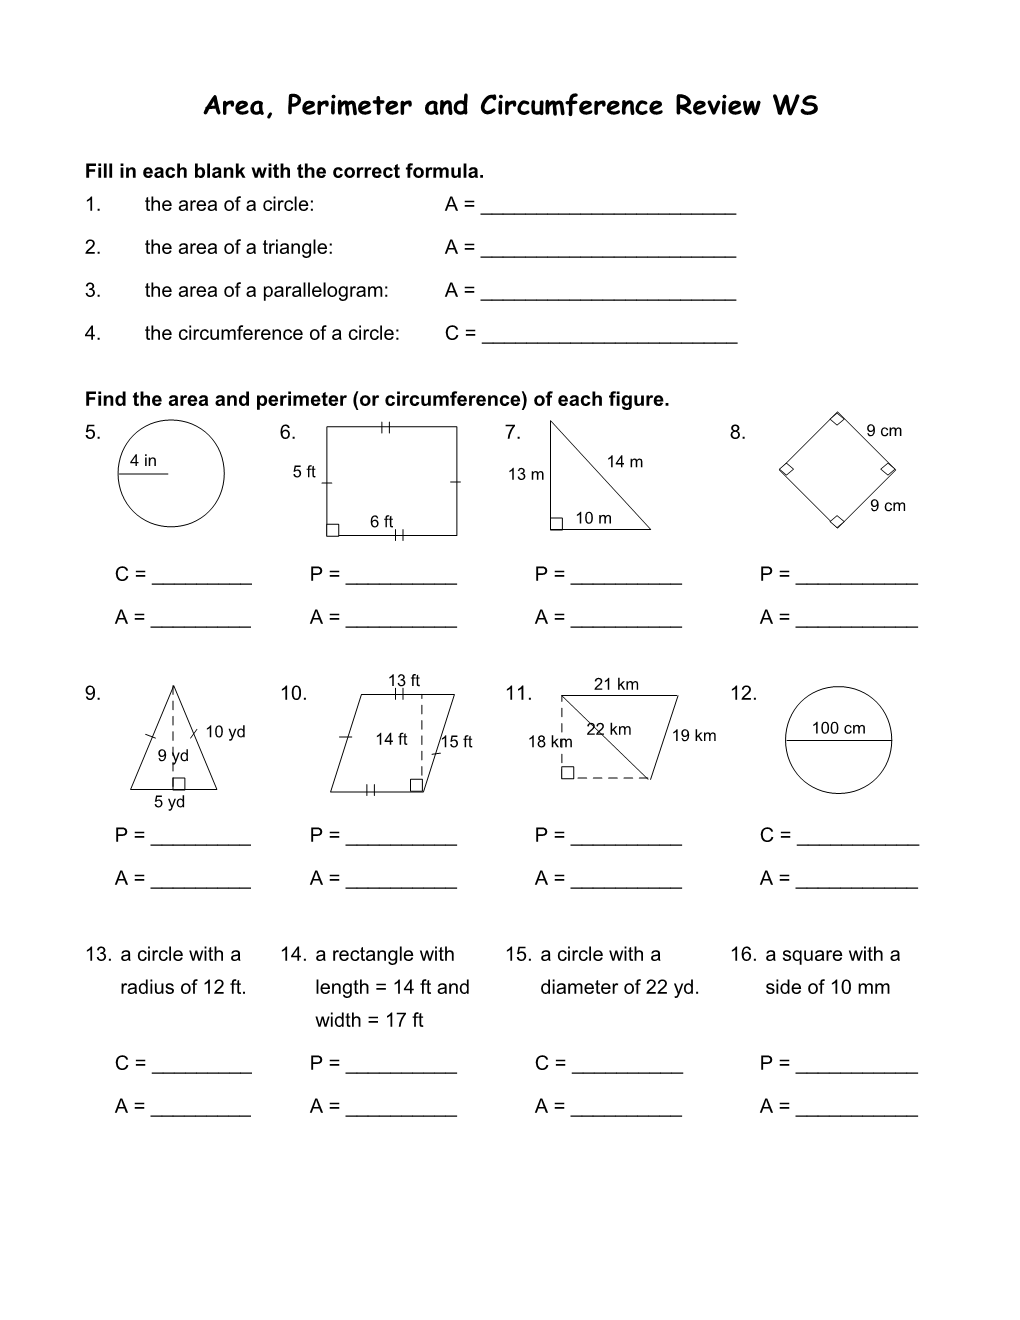 Area, Perimeter and Circumference Review WS